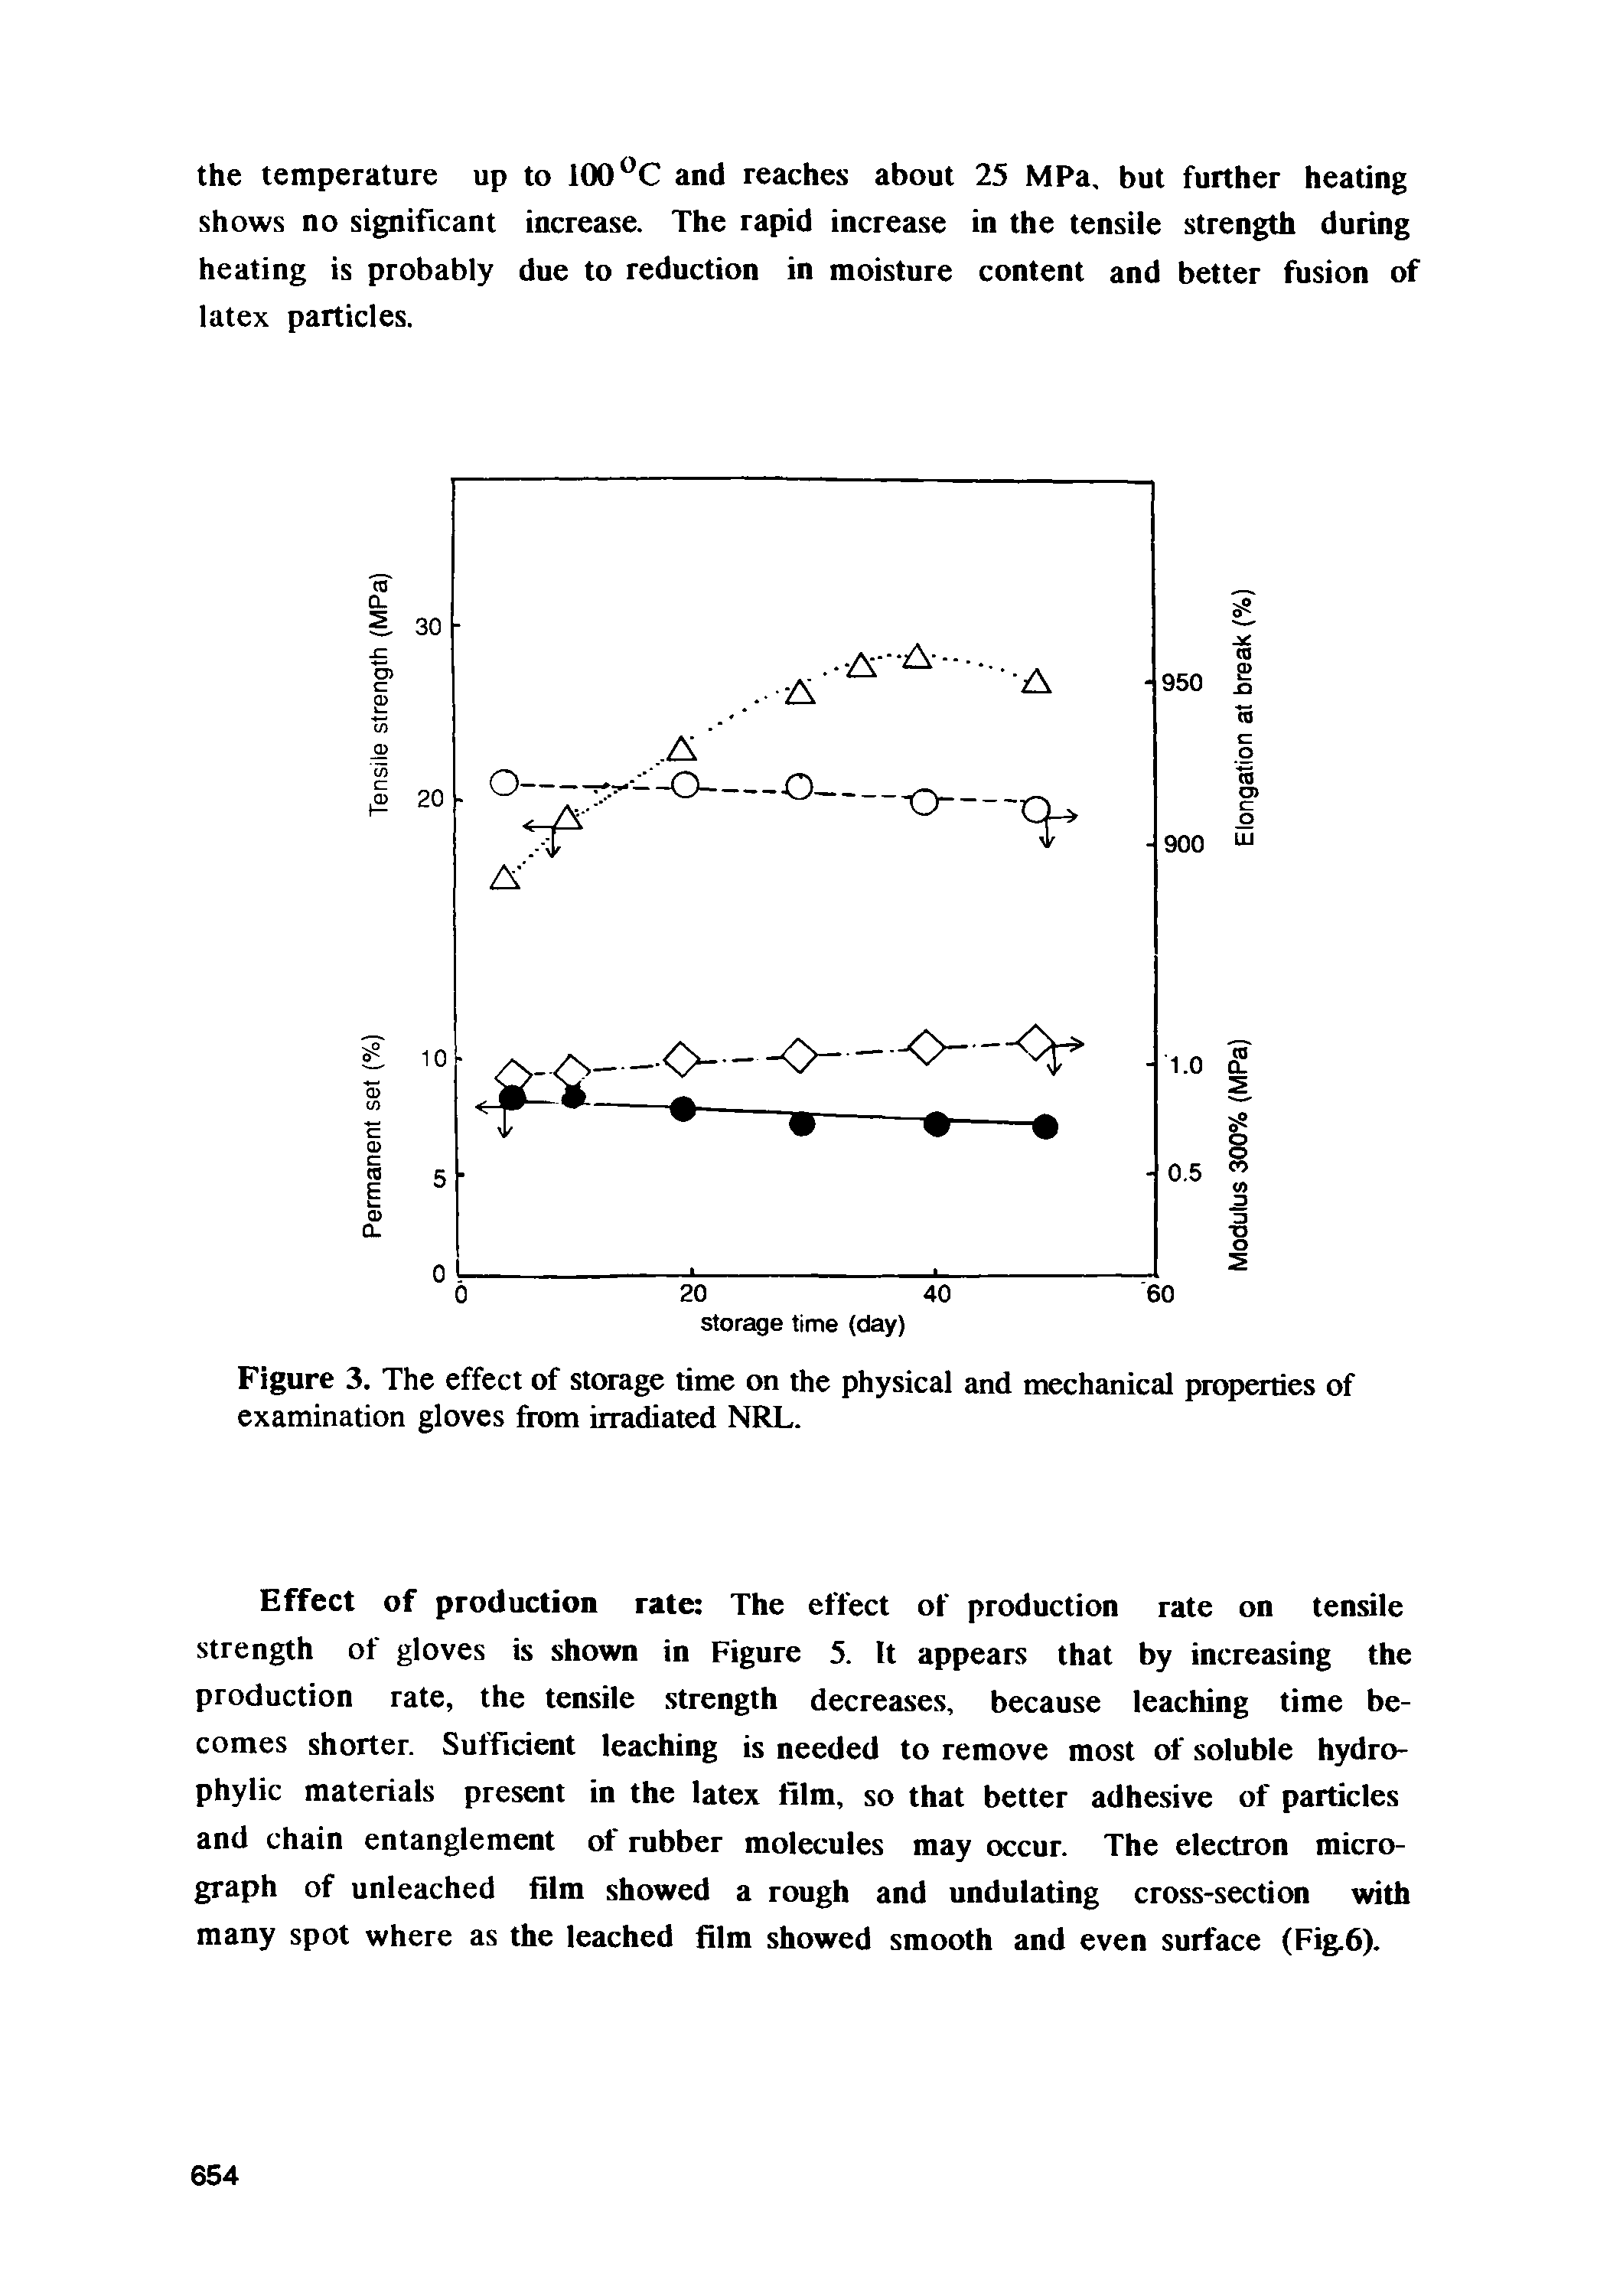 Figure 3. The effect of storage time on the physical and mechanical properties of examination gloves from irradiated NRL.